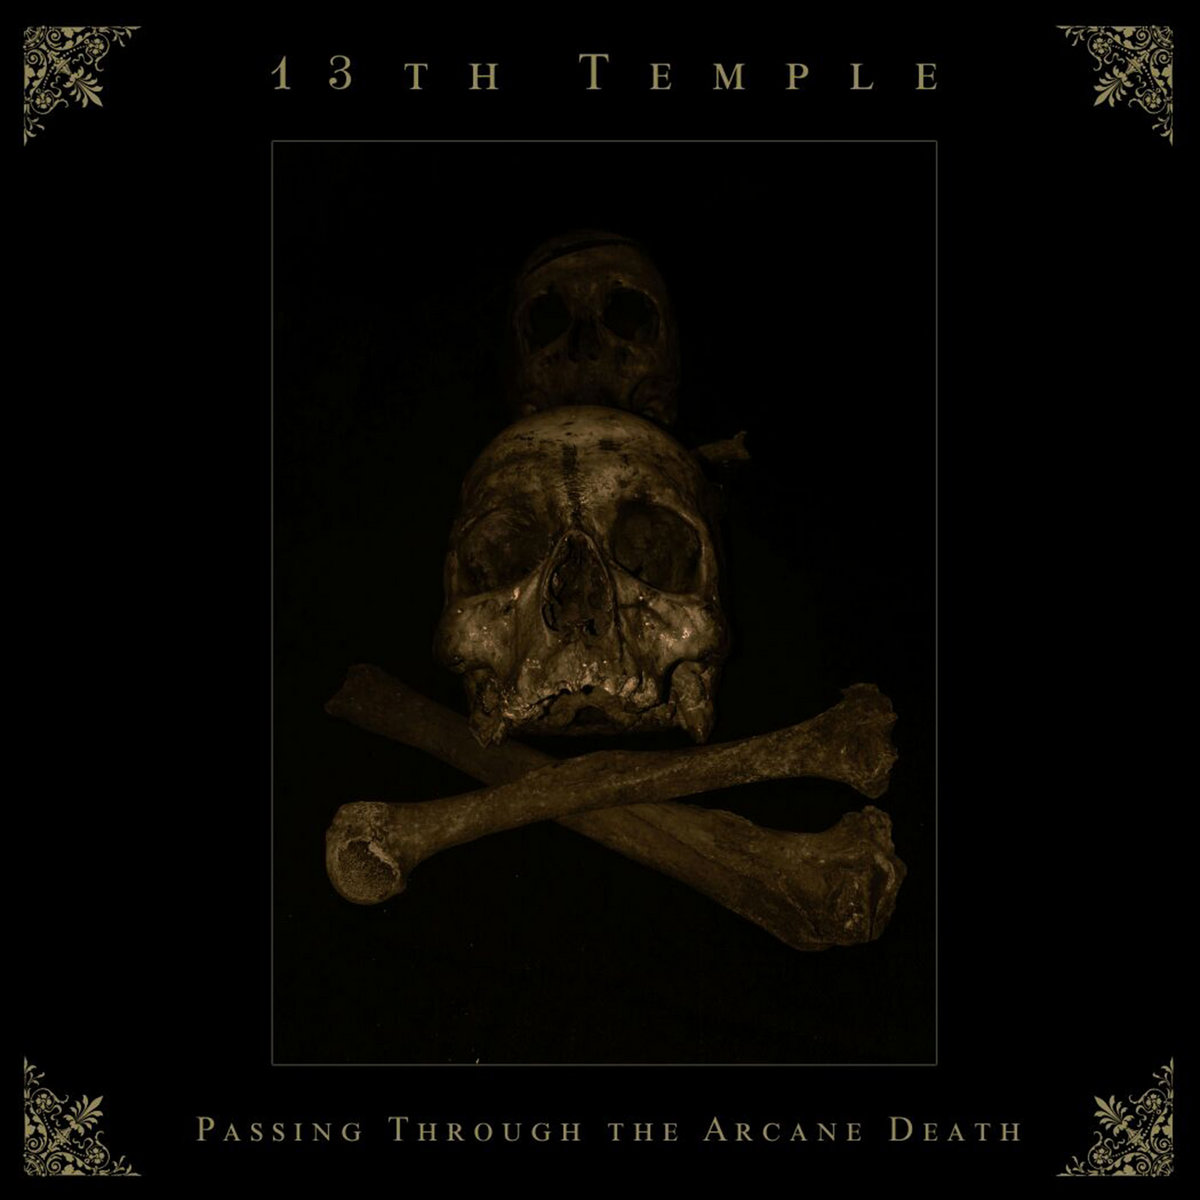 13th TEMPLE - Passing through the arcane death